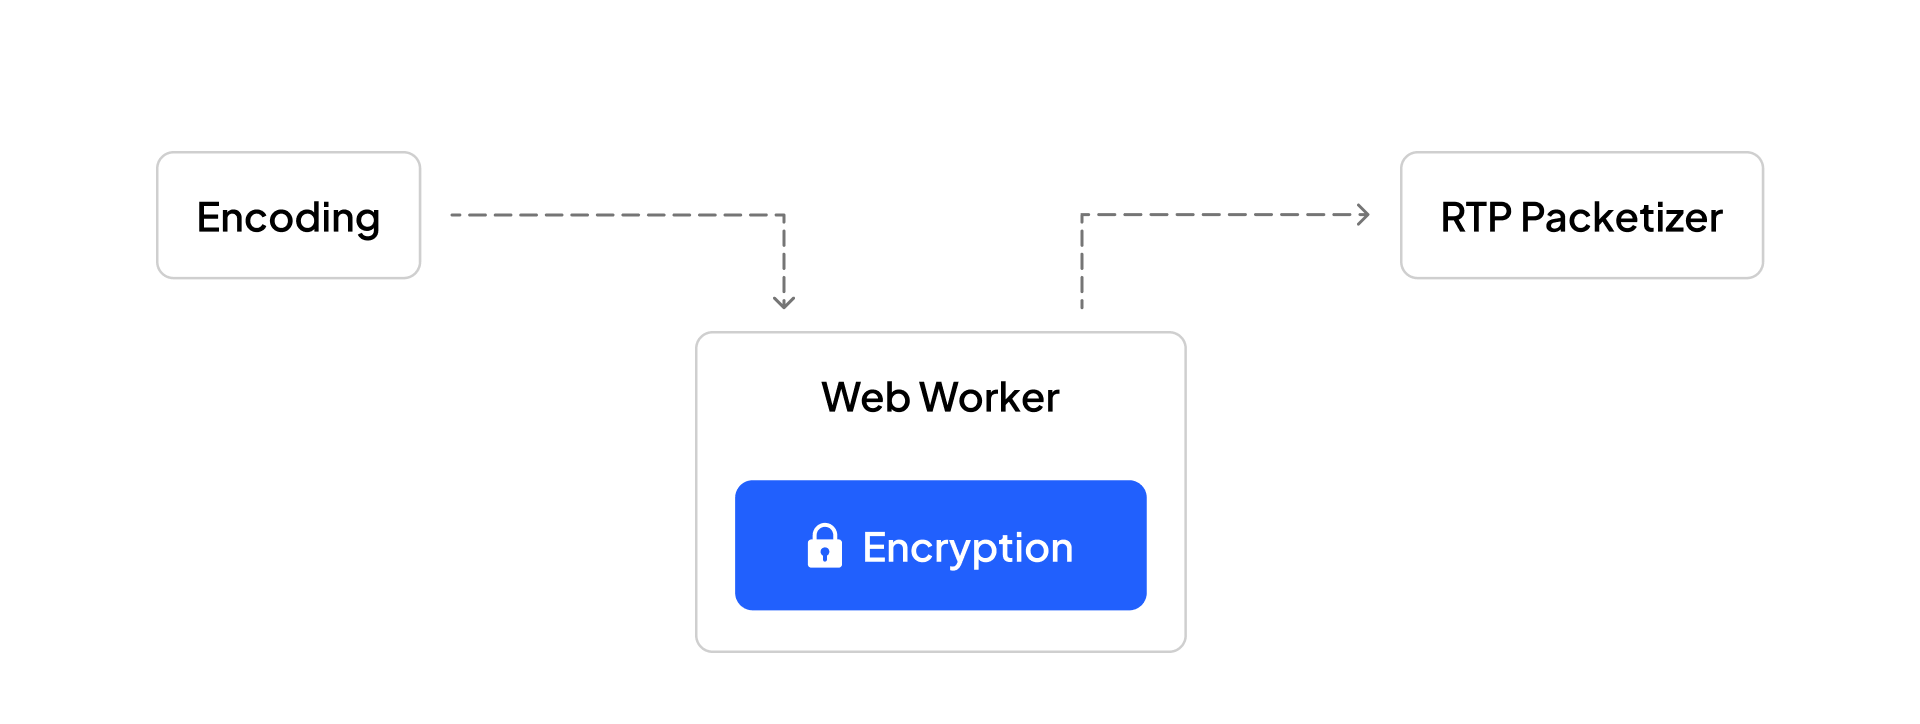 Announcing End-to-End Encryption in Dyte